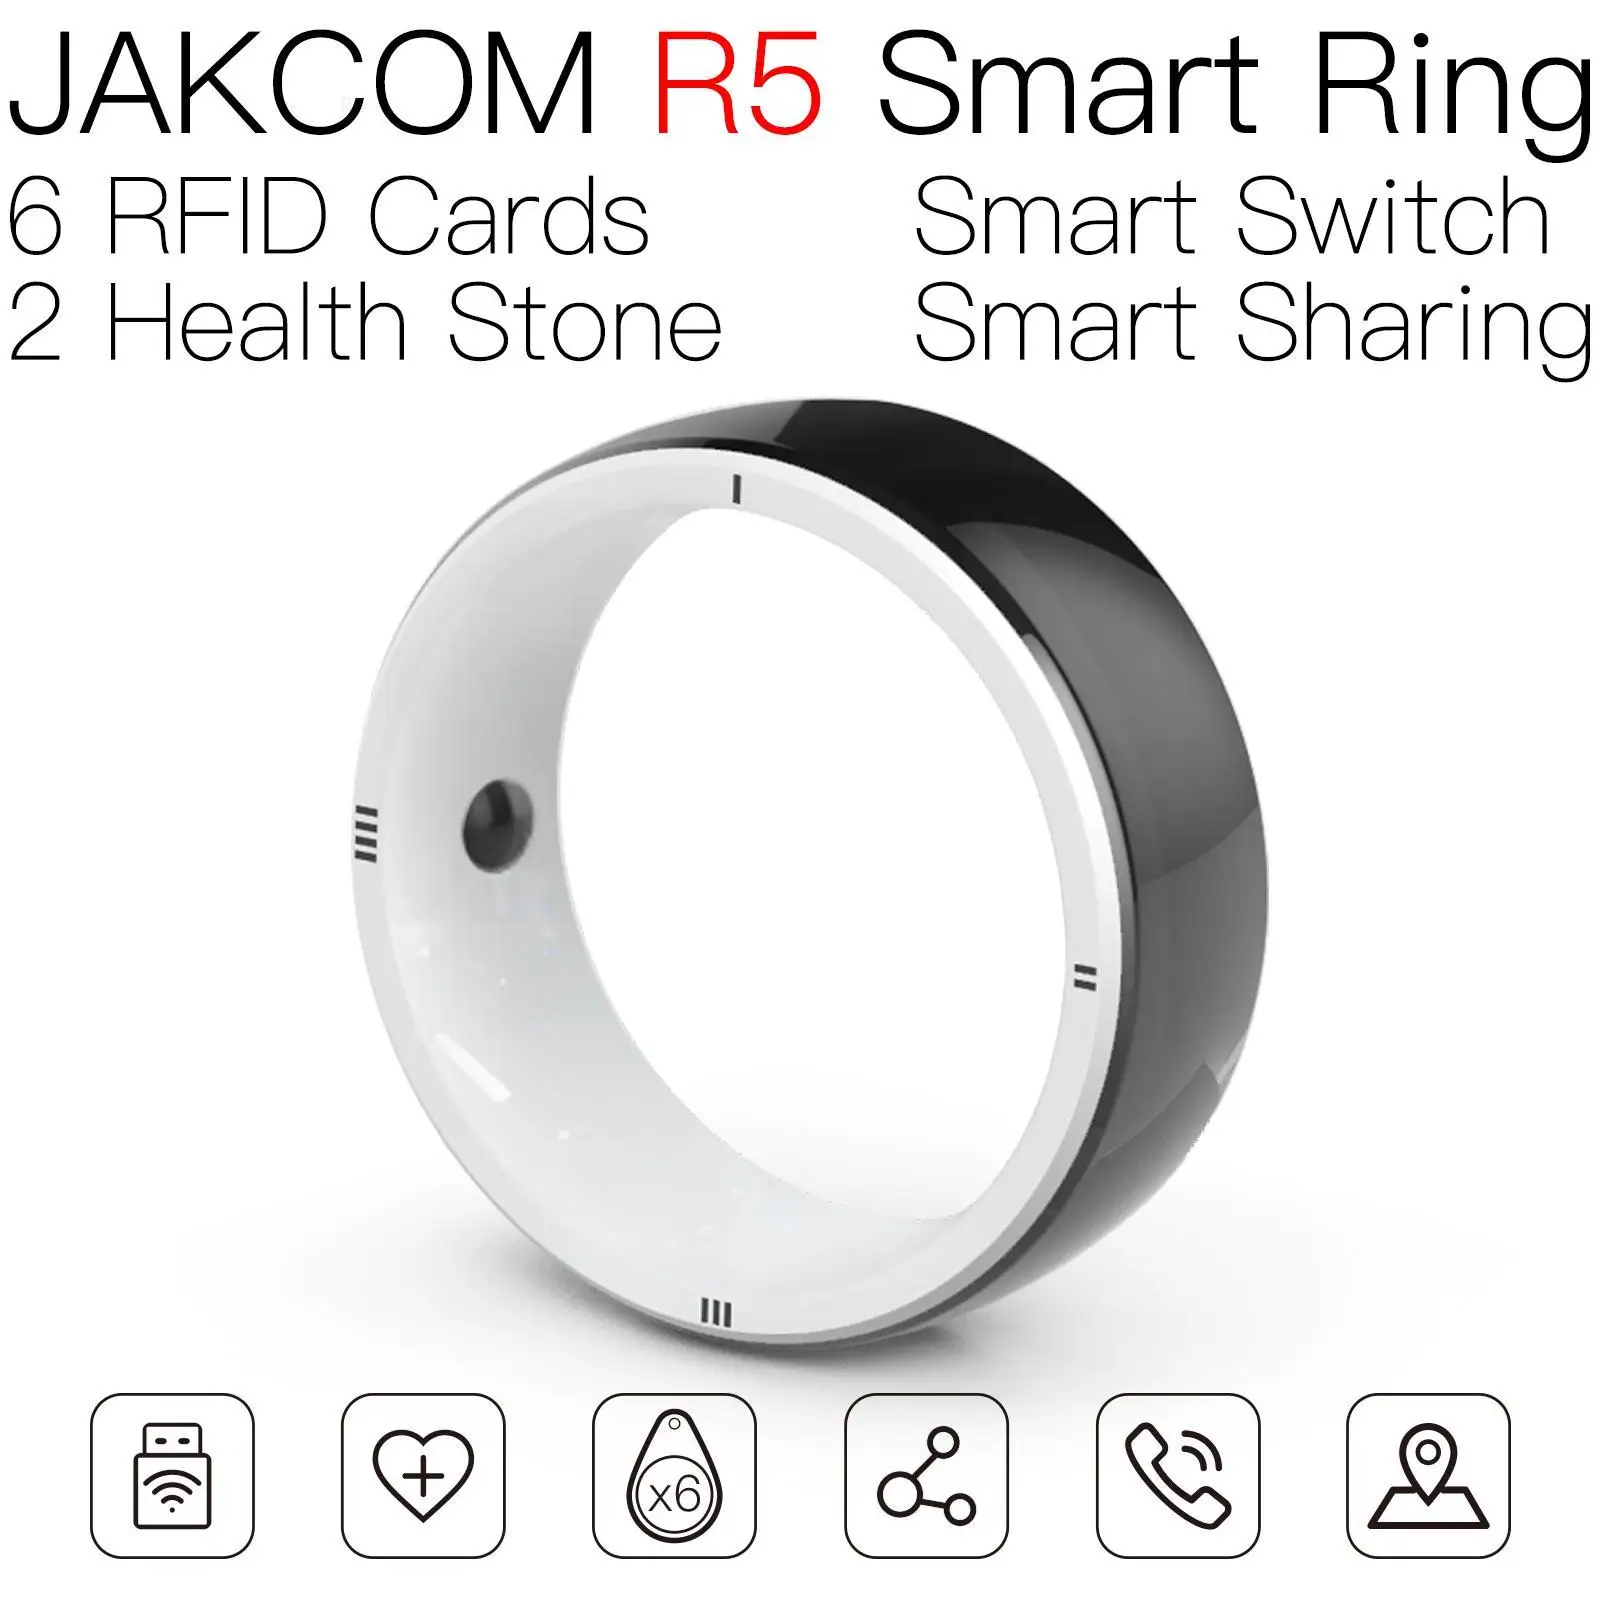 

JAKCOM R5 Smart Ring New arrival as huanxing mini electric nose hair trimmer hn1 controller switch armbands